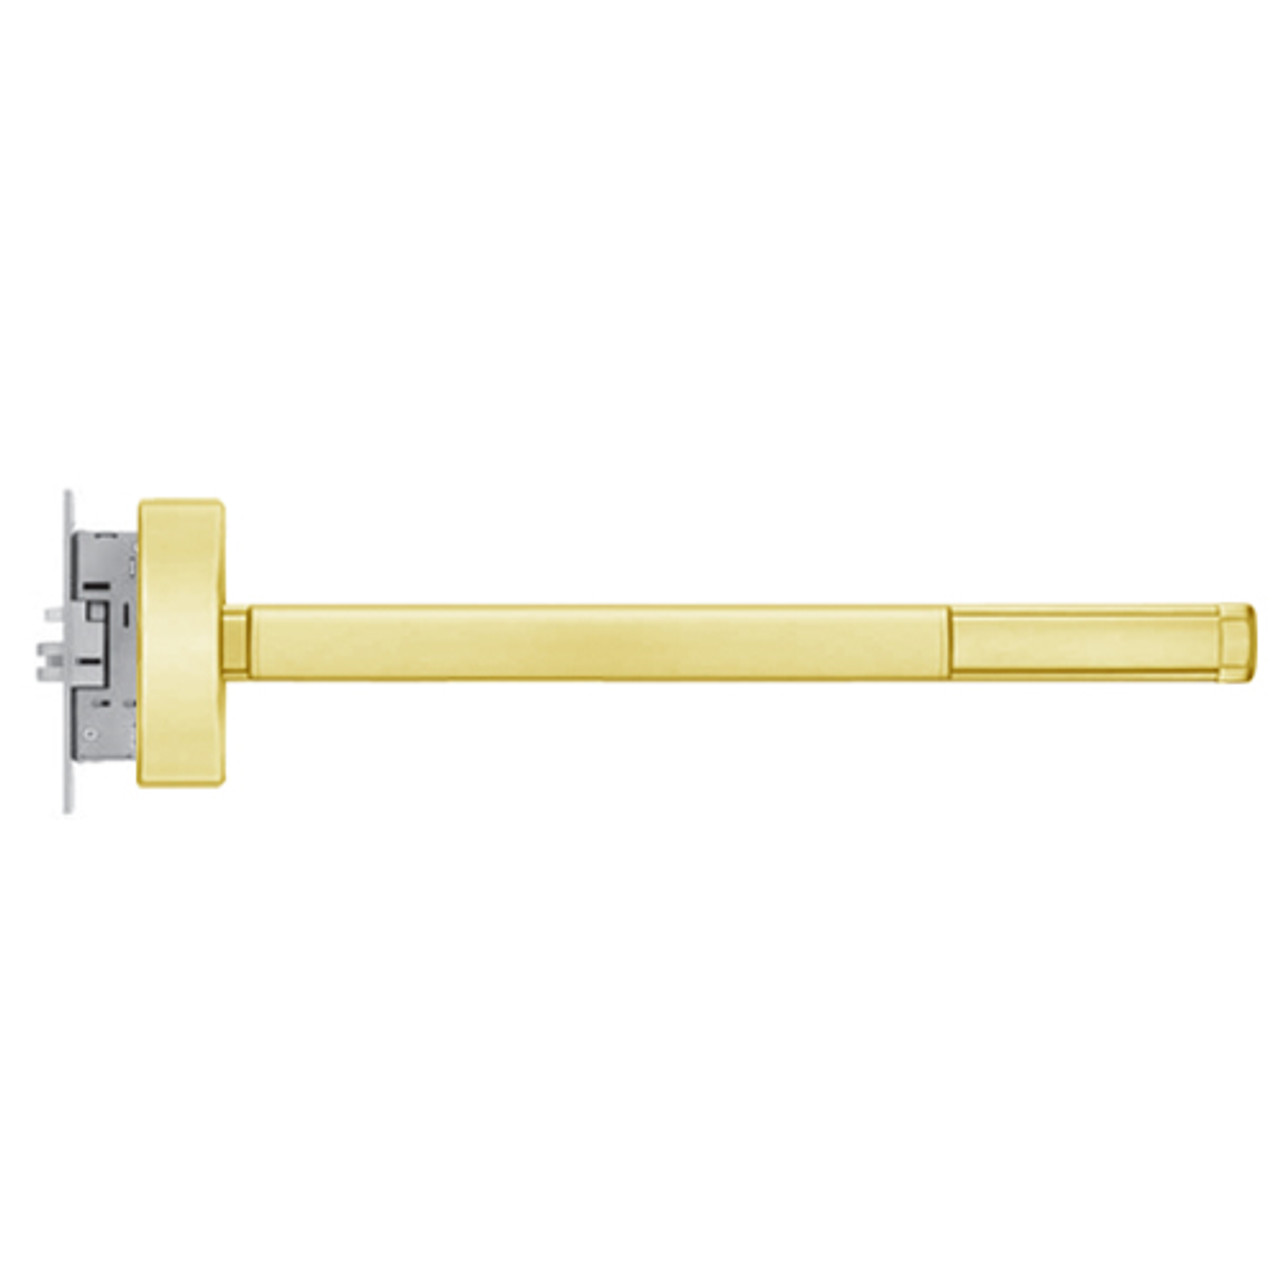 TS2314-RHR-605-48 PHI 2300 Series Apex Mortise Exit Device with Touchbar Monitoring Switch Prepped for Lever-Knob Always Active in Bright Brass Finish